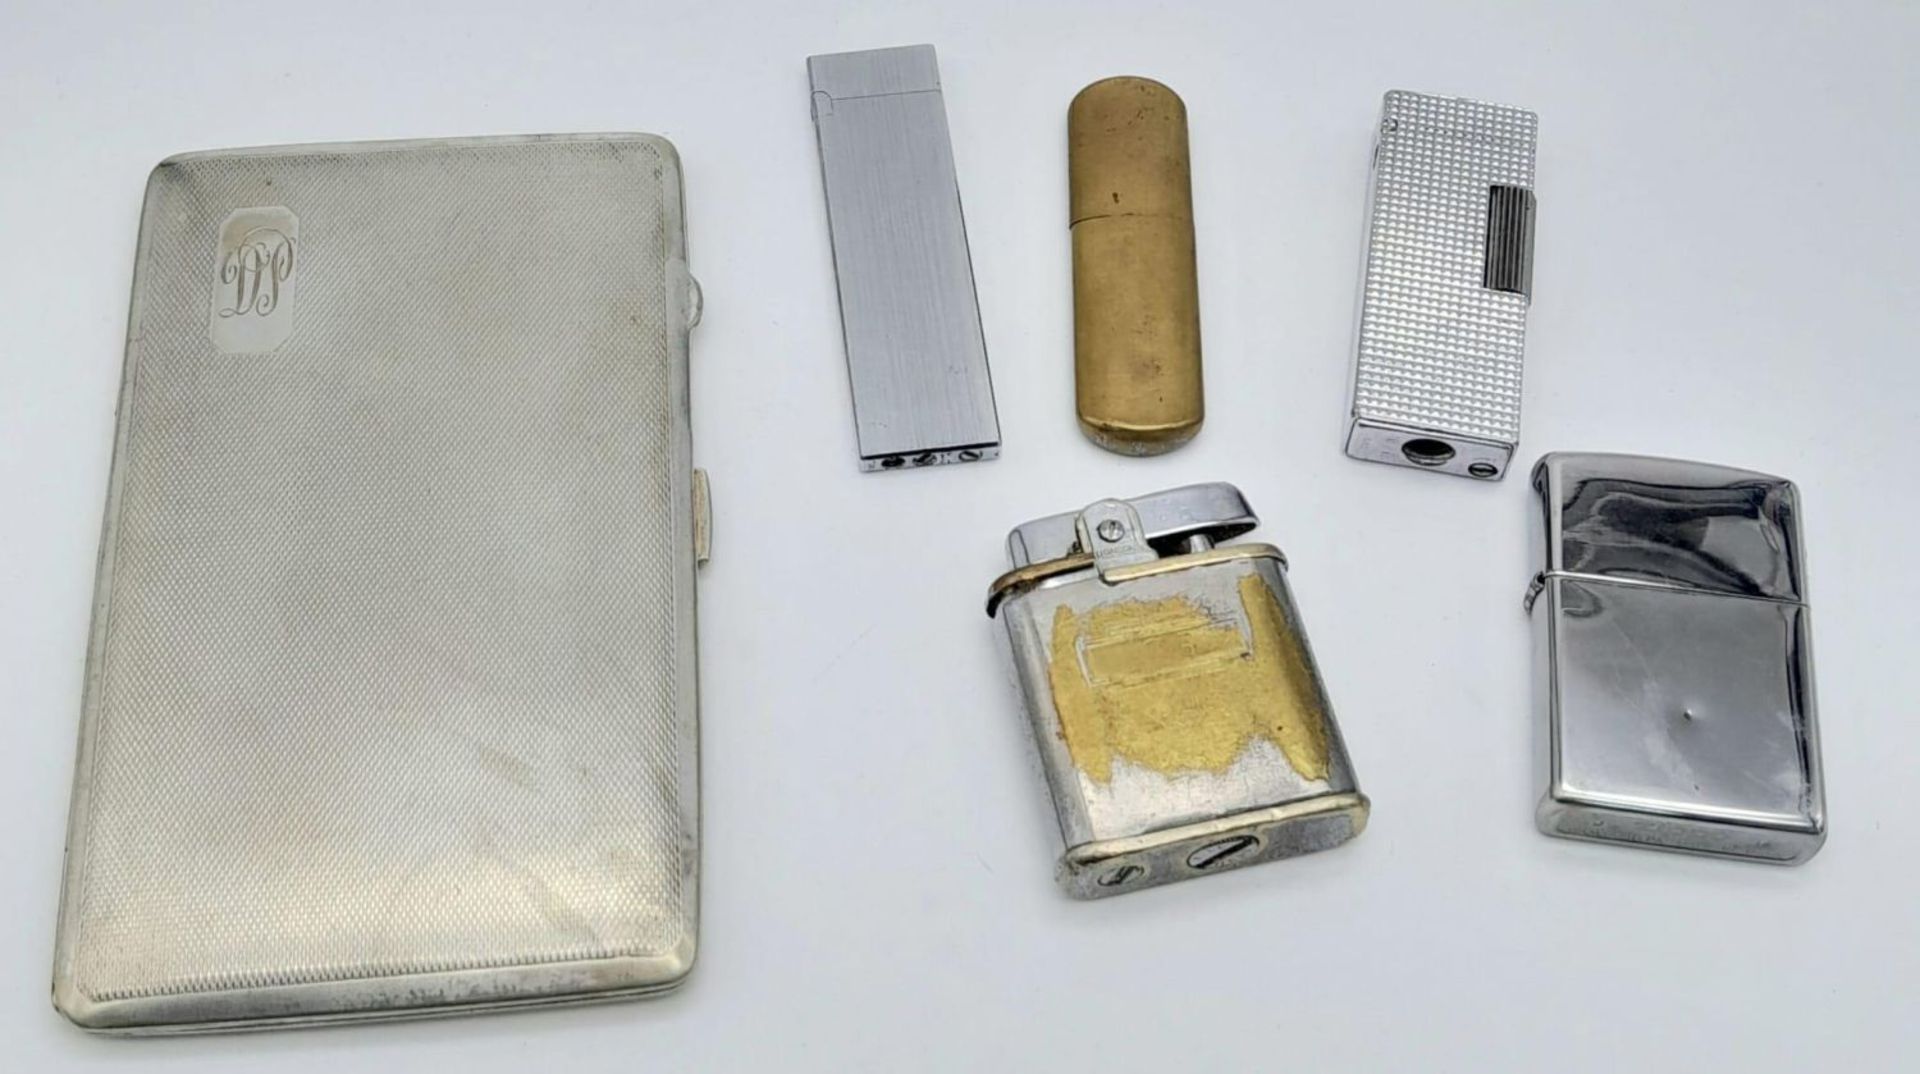 5 VINTAGE LIGHTERS TO INCLUDE A ZIPPO AND AN ARMY ISSUE PETROL LIGHTER PLUS A 1940'S CIGARETTE